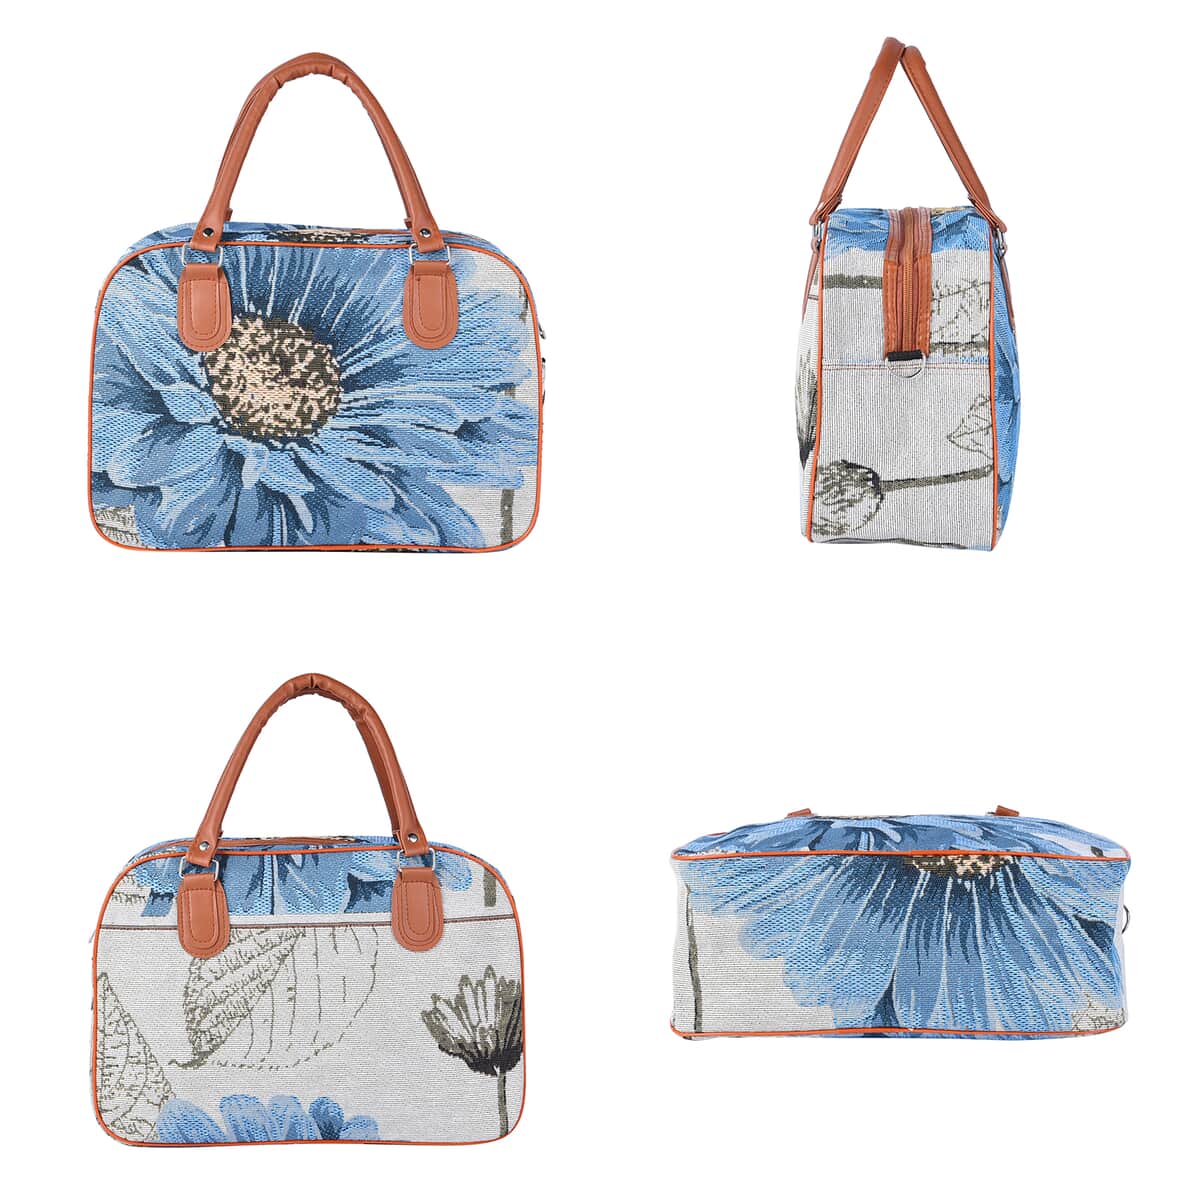 Off White and Blue Flower Pattern Jute Travel Bag (14.17"x5.9"x9.06") with 38 Inches Shoulder Strap image number 3